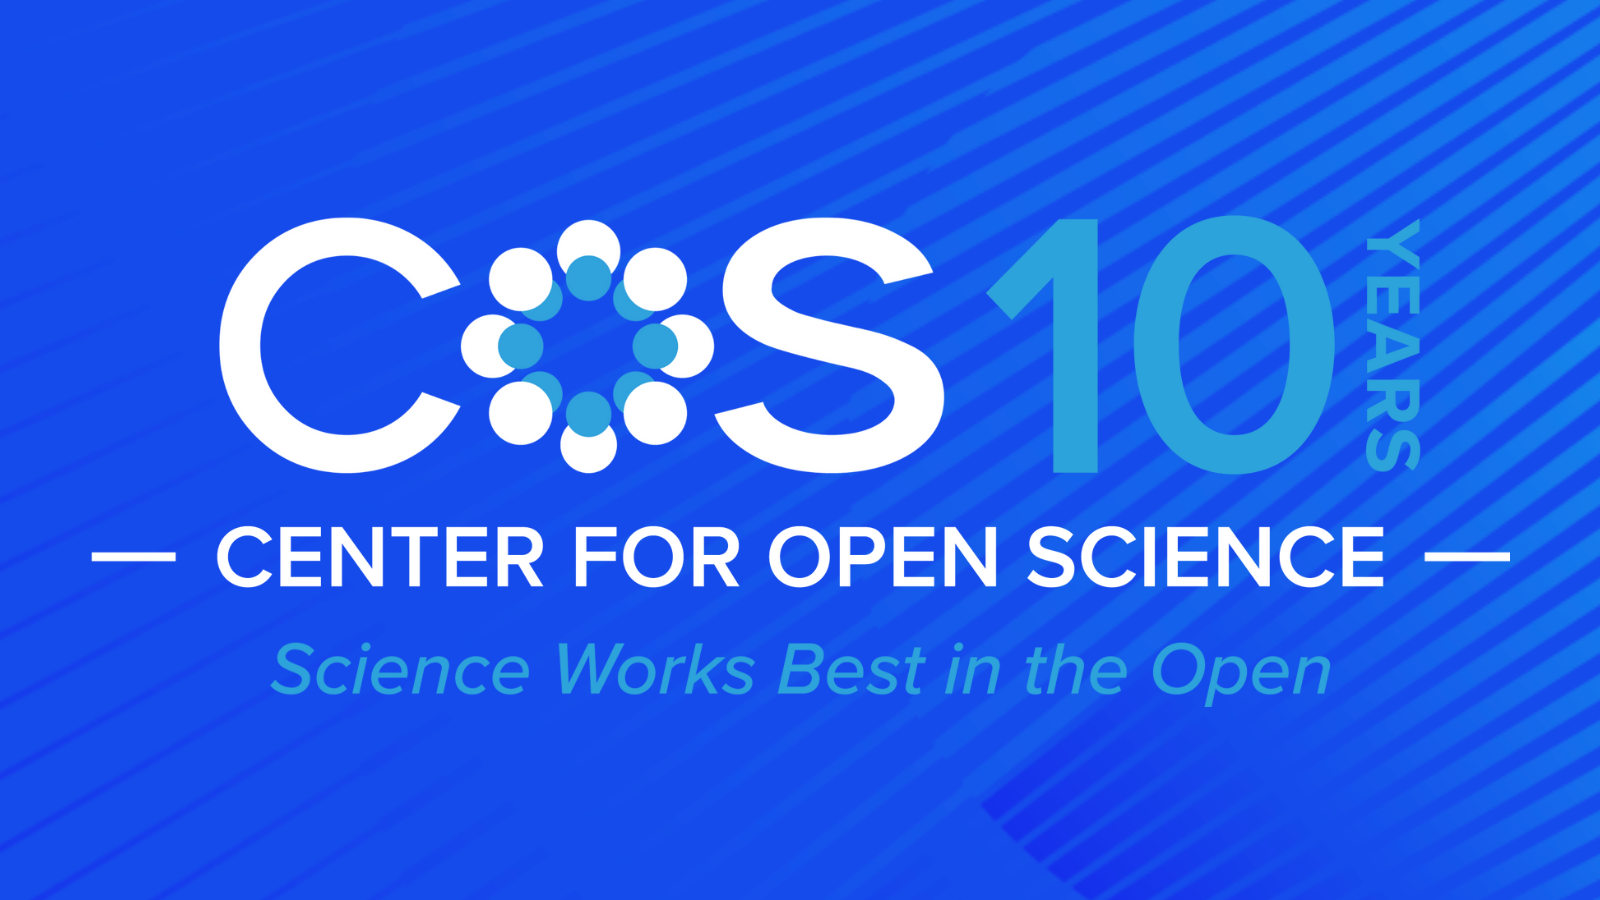 Blue background with COS logo and tagline that reads "Science Works Best in the Open"